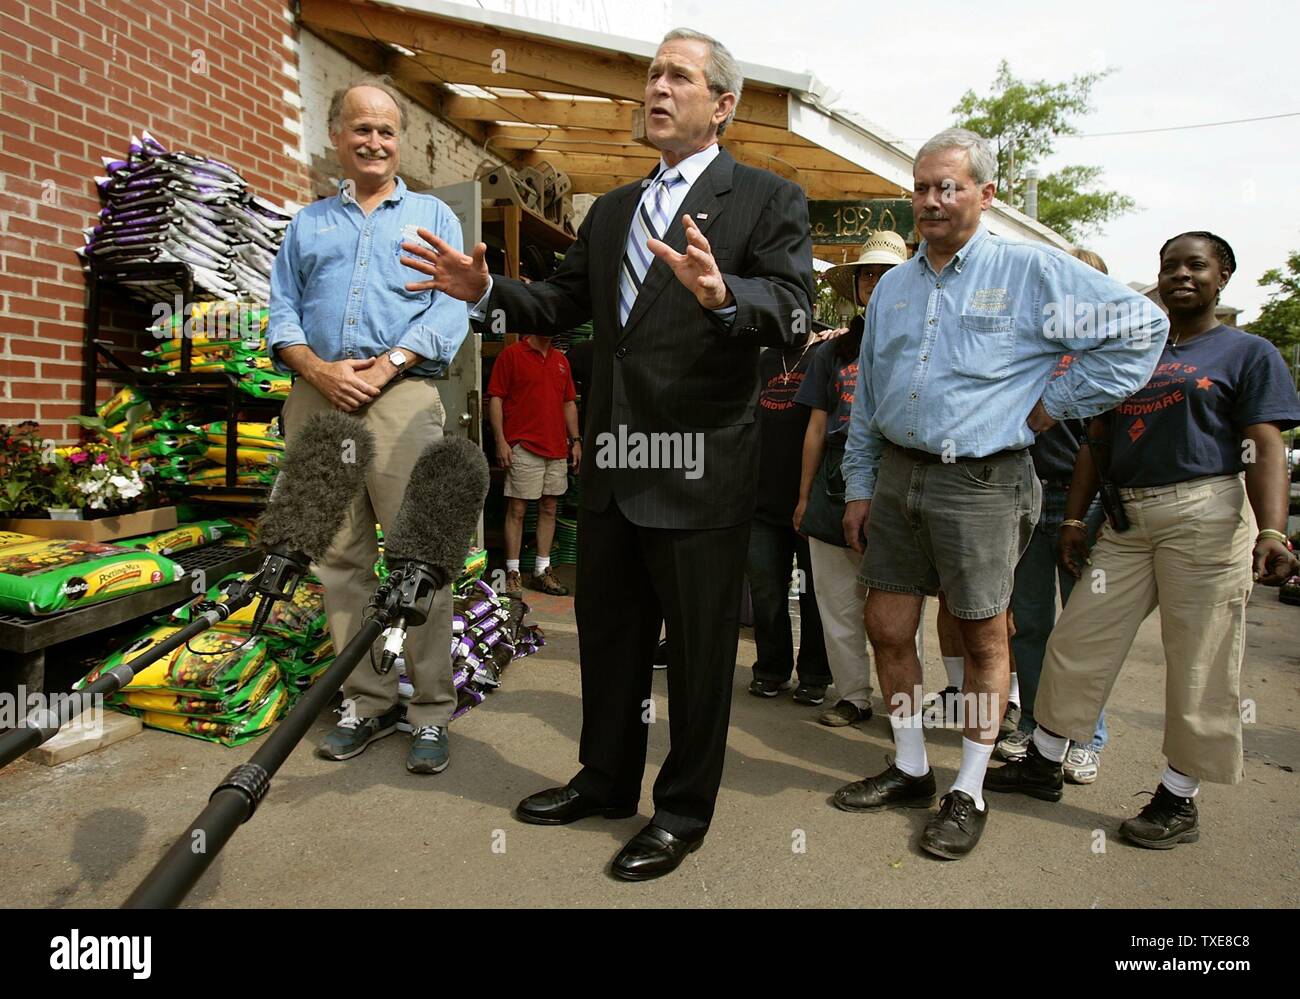 U.S. President George W. Bush (C) stands with Frager's Hardware owner John  Weintraub (L) and his employees on Capitol Hill May 5, 2006 in Washington.  Bush made a quick trip to the